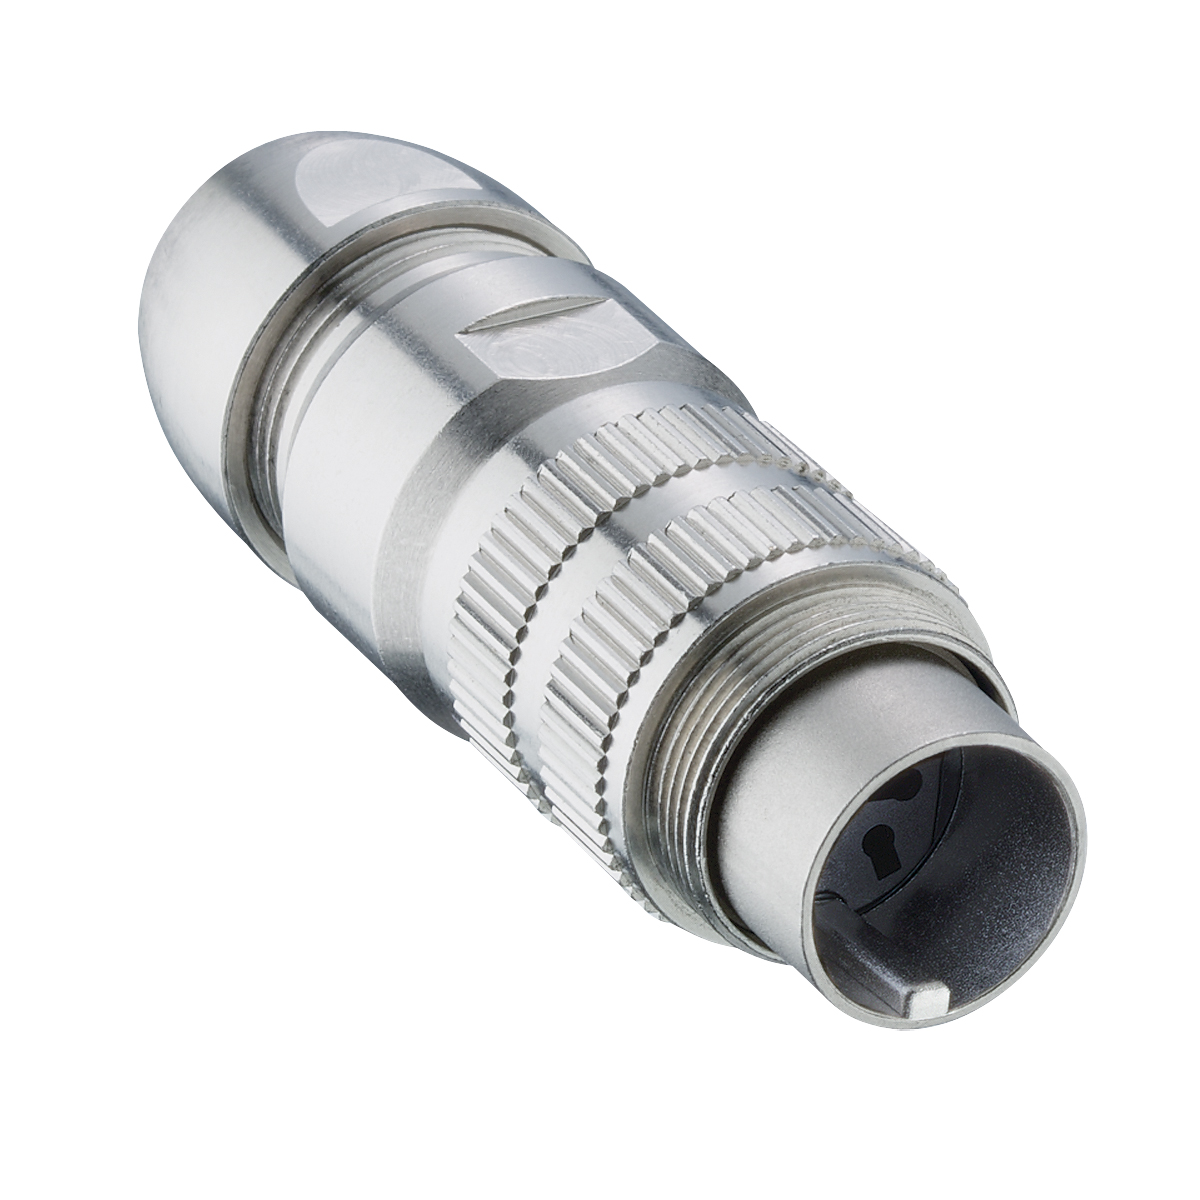 Lumberg: 36500 (Series 03 | Circular connectors with threaded joint M16 acc. to IEC 61076-2-106, IP40/IP68)